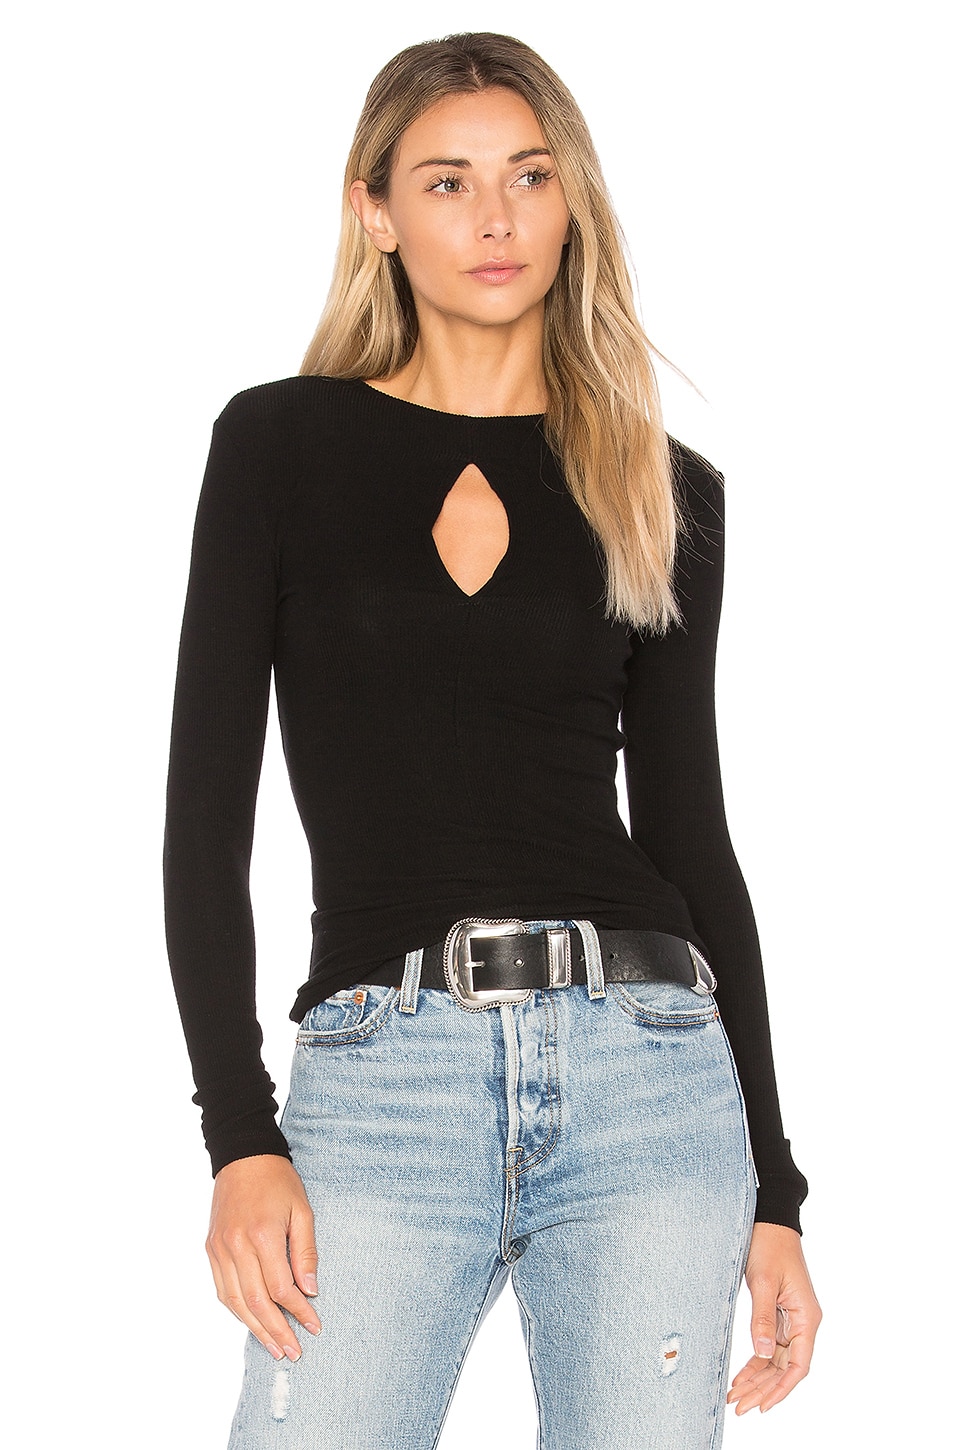 GETTINGBACKTOSQUAREONE The Keyhole Top in Black | REVOLVE